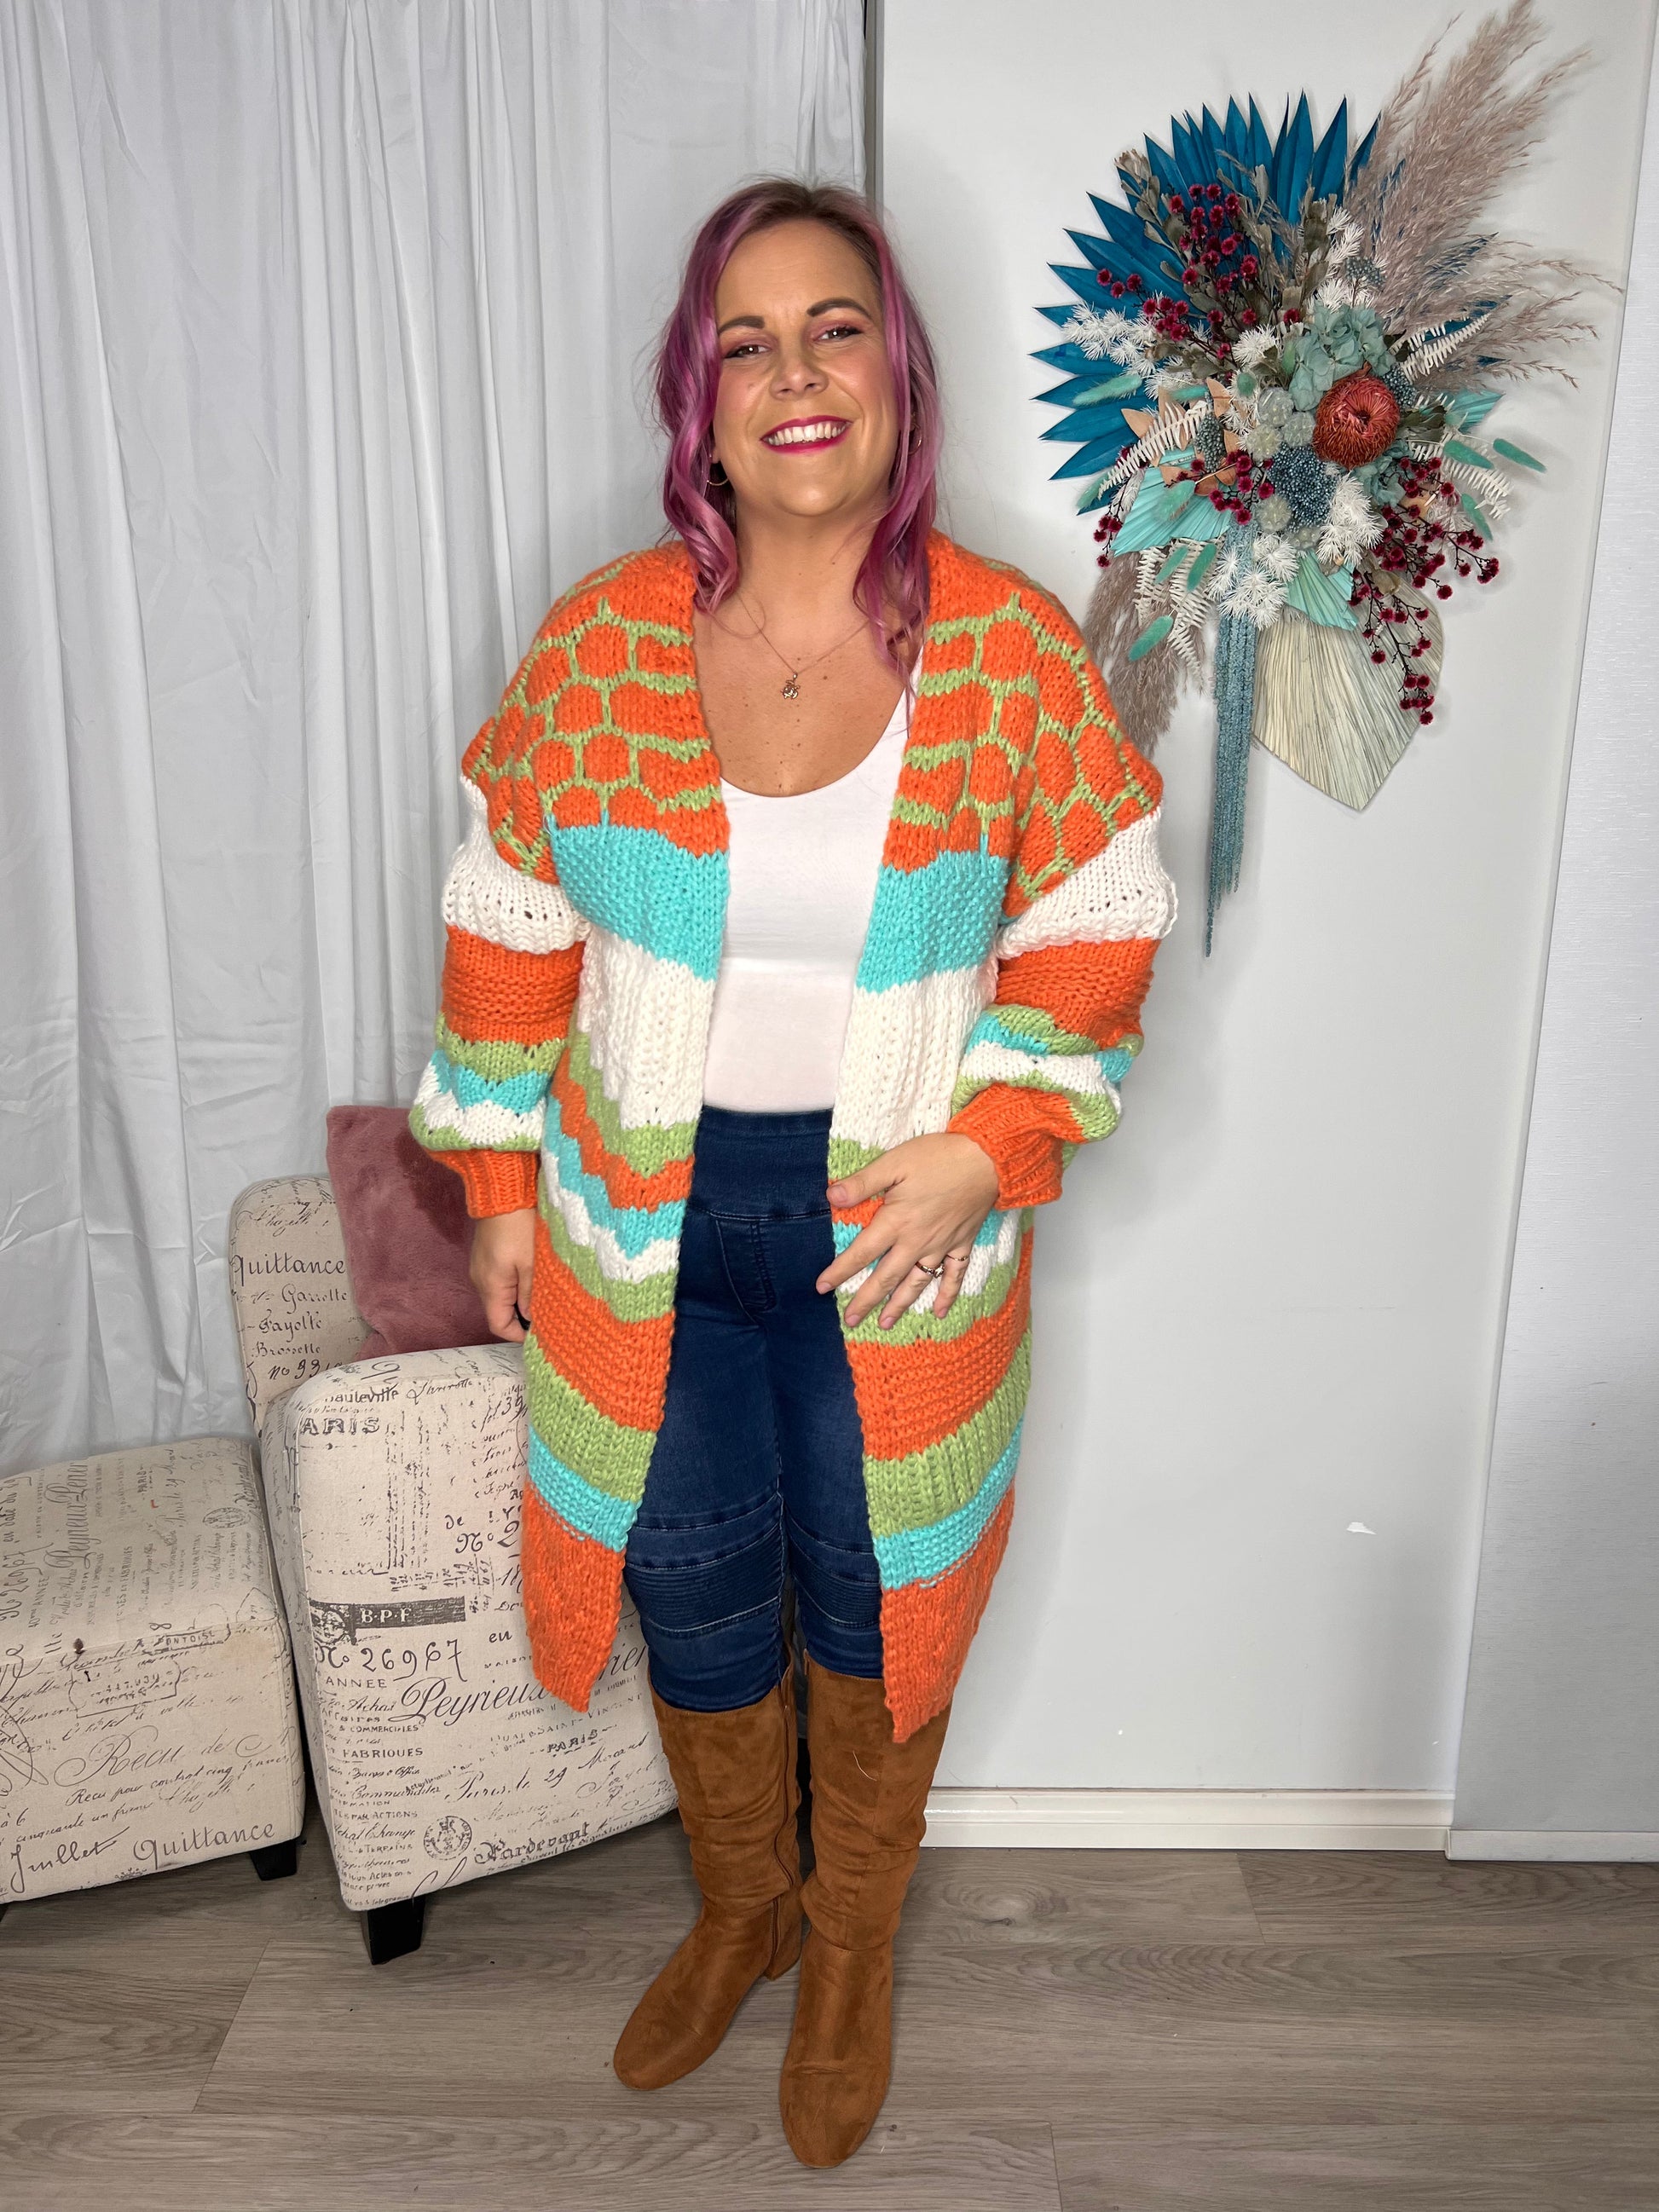 Munich Maxi Cardigan - Orange Aqua | Ebby and I | Fun! Check out this show stopping cardi. Wrap yourself in this bright and cosy oversized knit that will get you through the gloomiest winters day
Features:

Long, ov